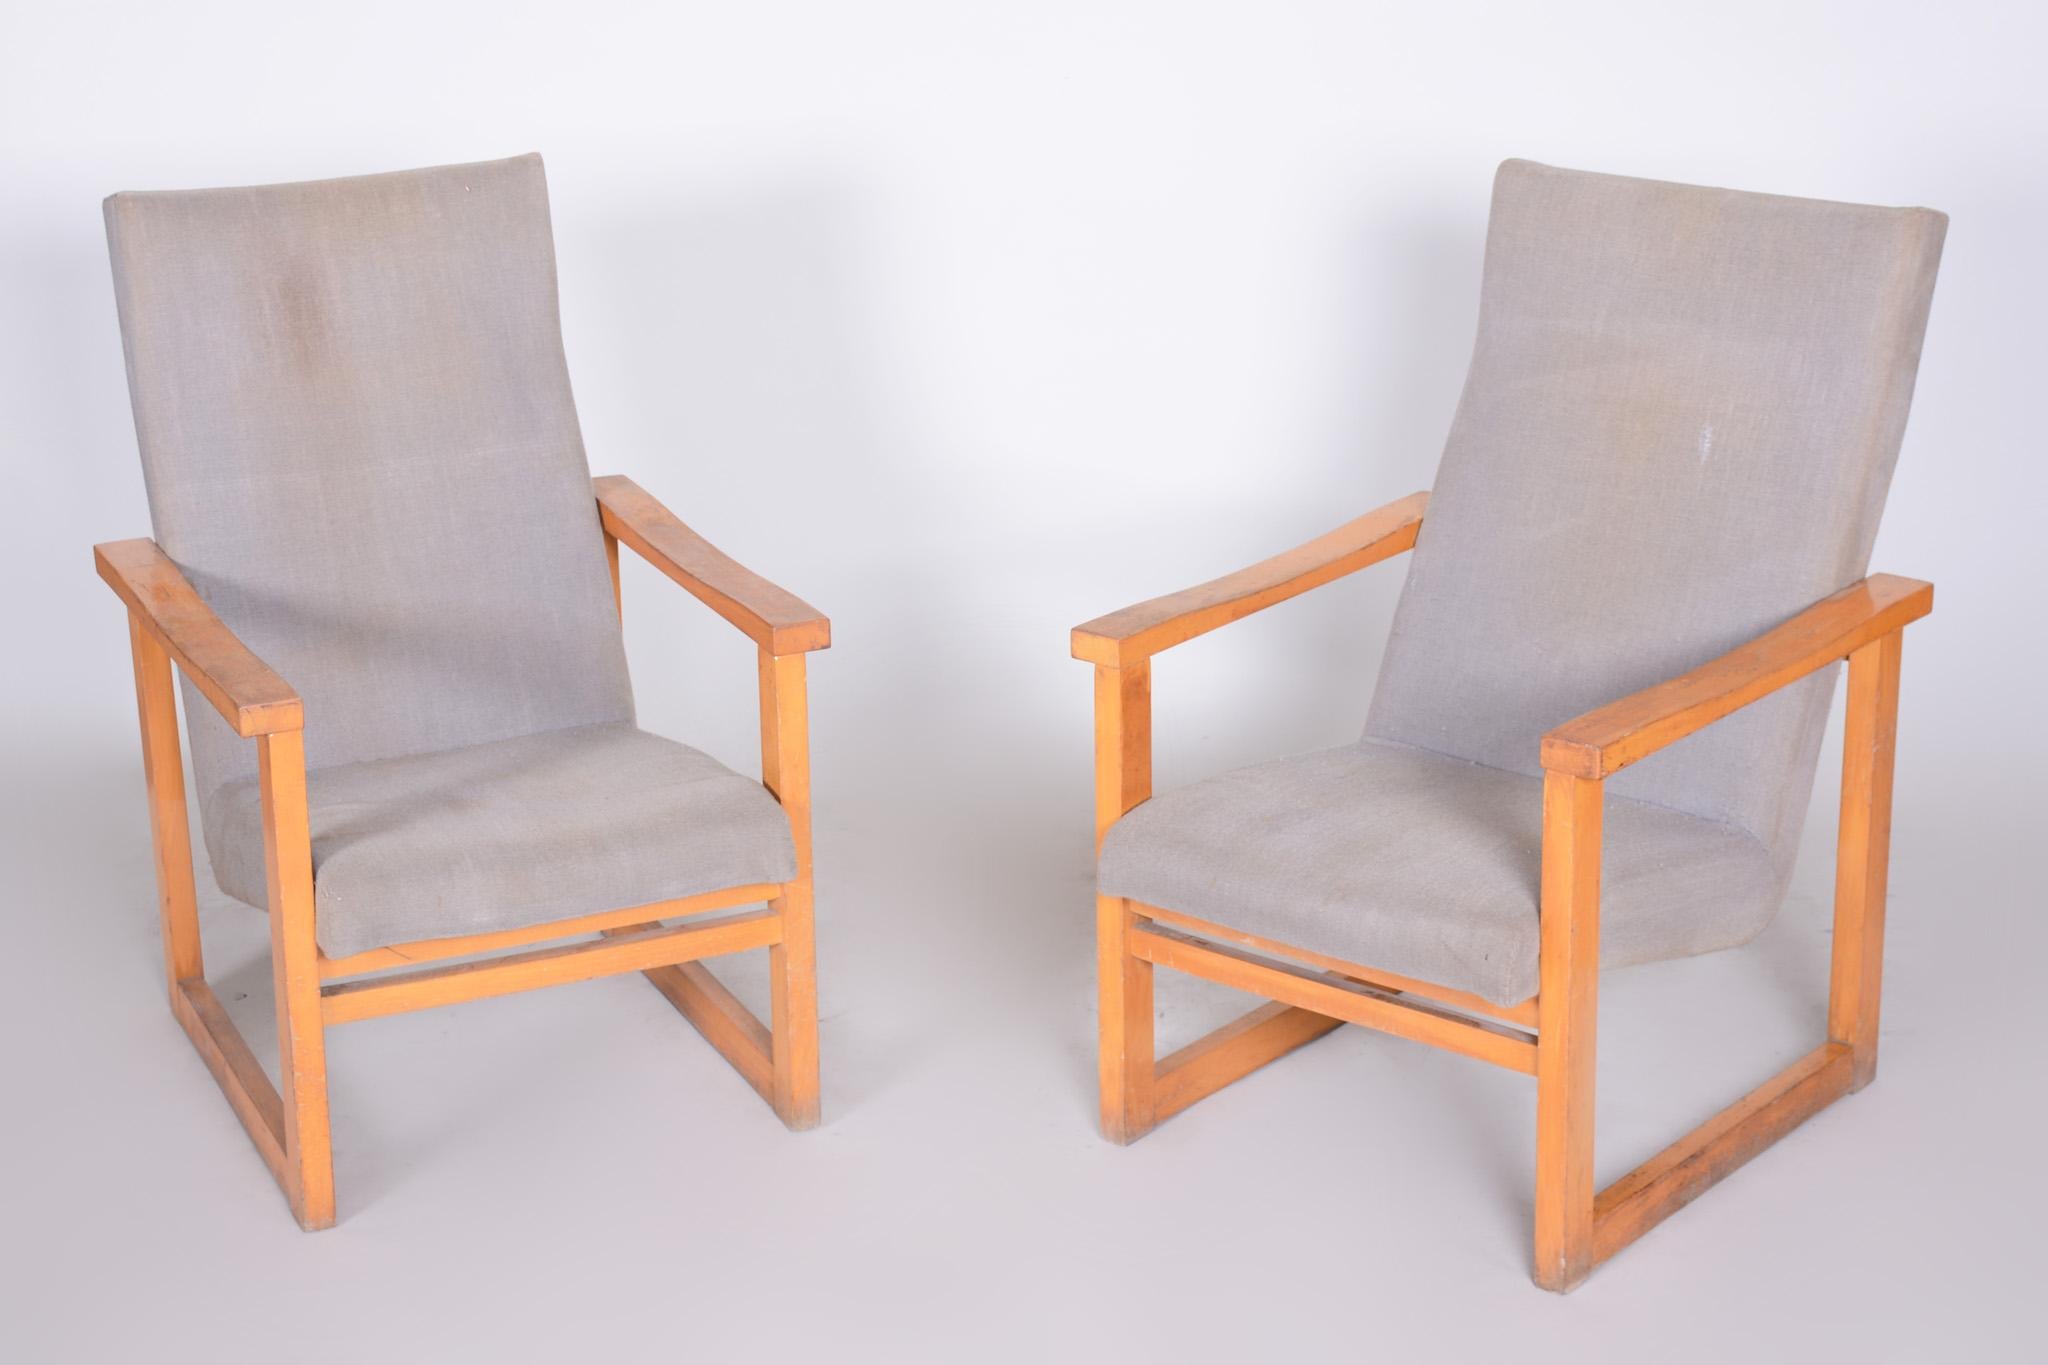 Pair of midcentury armchairs.
Original preserved condition
Source: Czechia
Material: Maple
Period: 1960-1969.